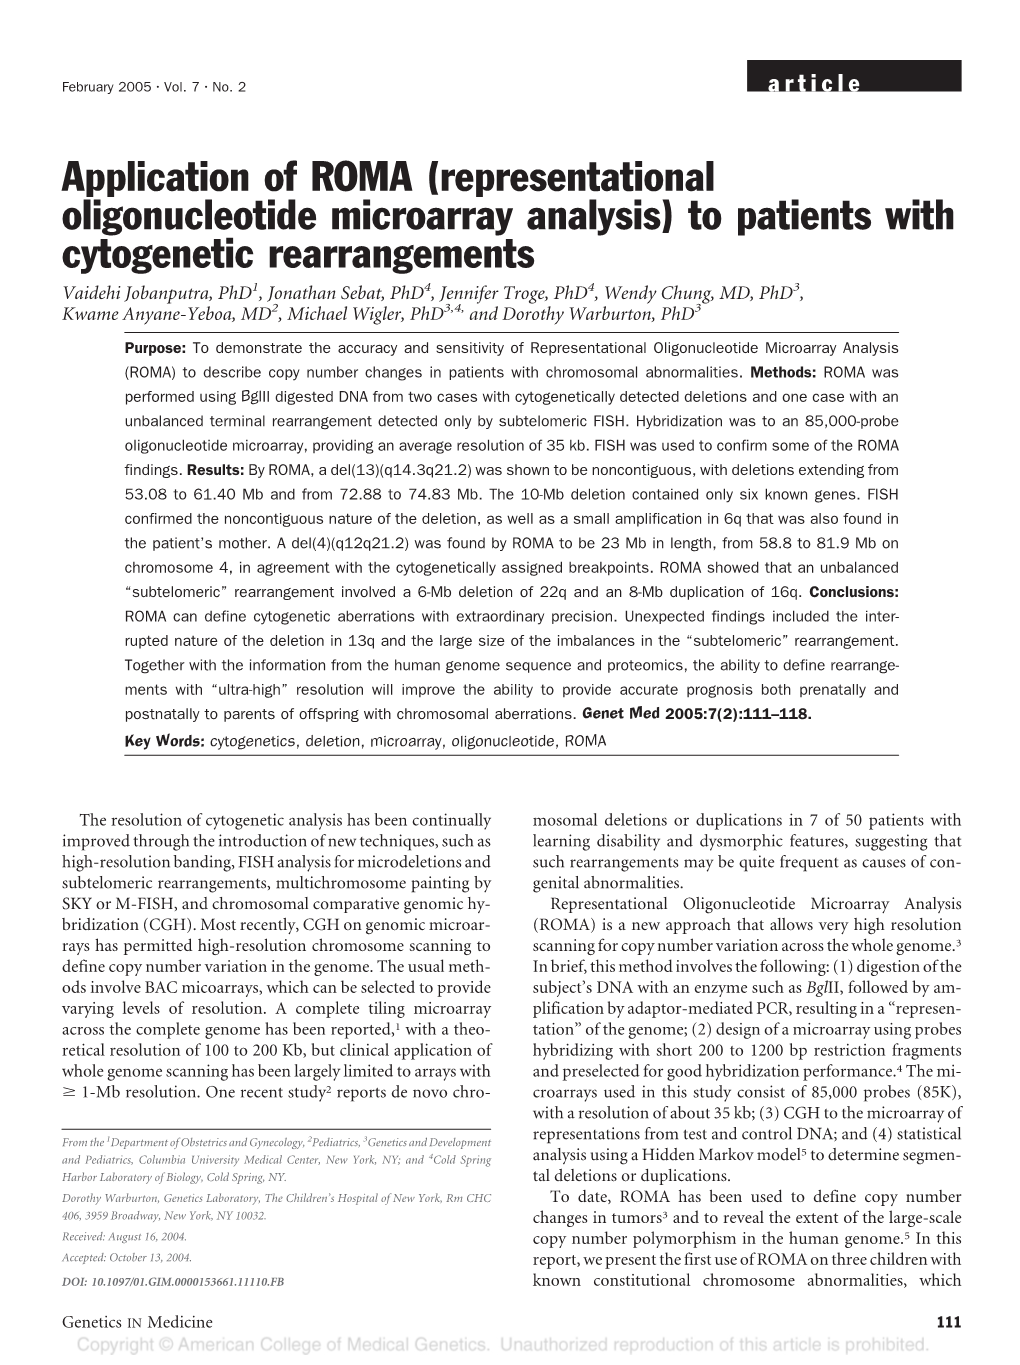 Application of ROMA (Representational Oligonucleotide Microarray Analysis) to Patients with Cytogenetic Rearrangements